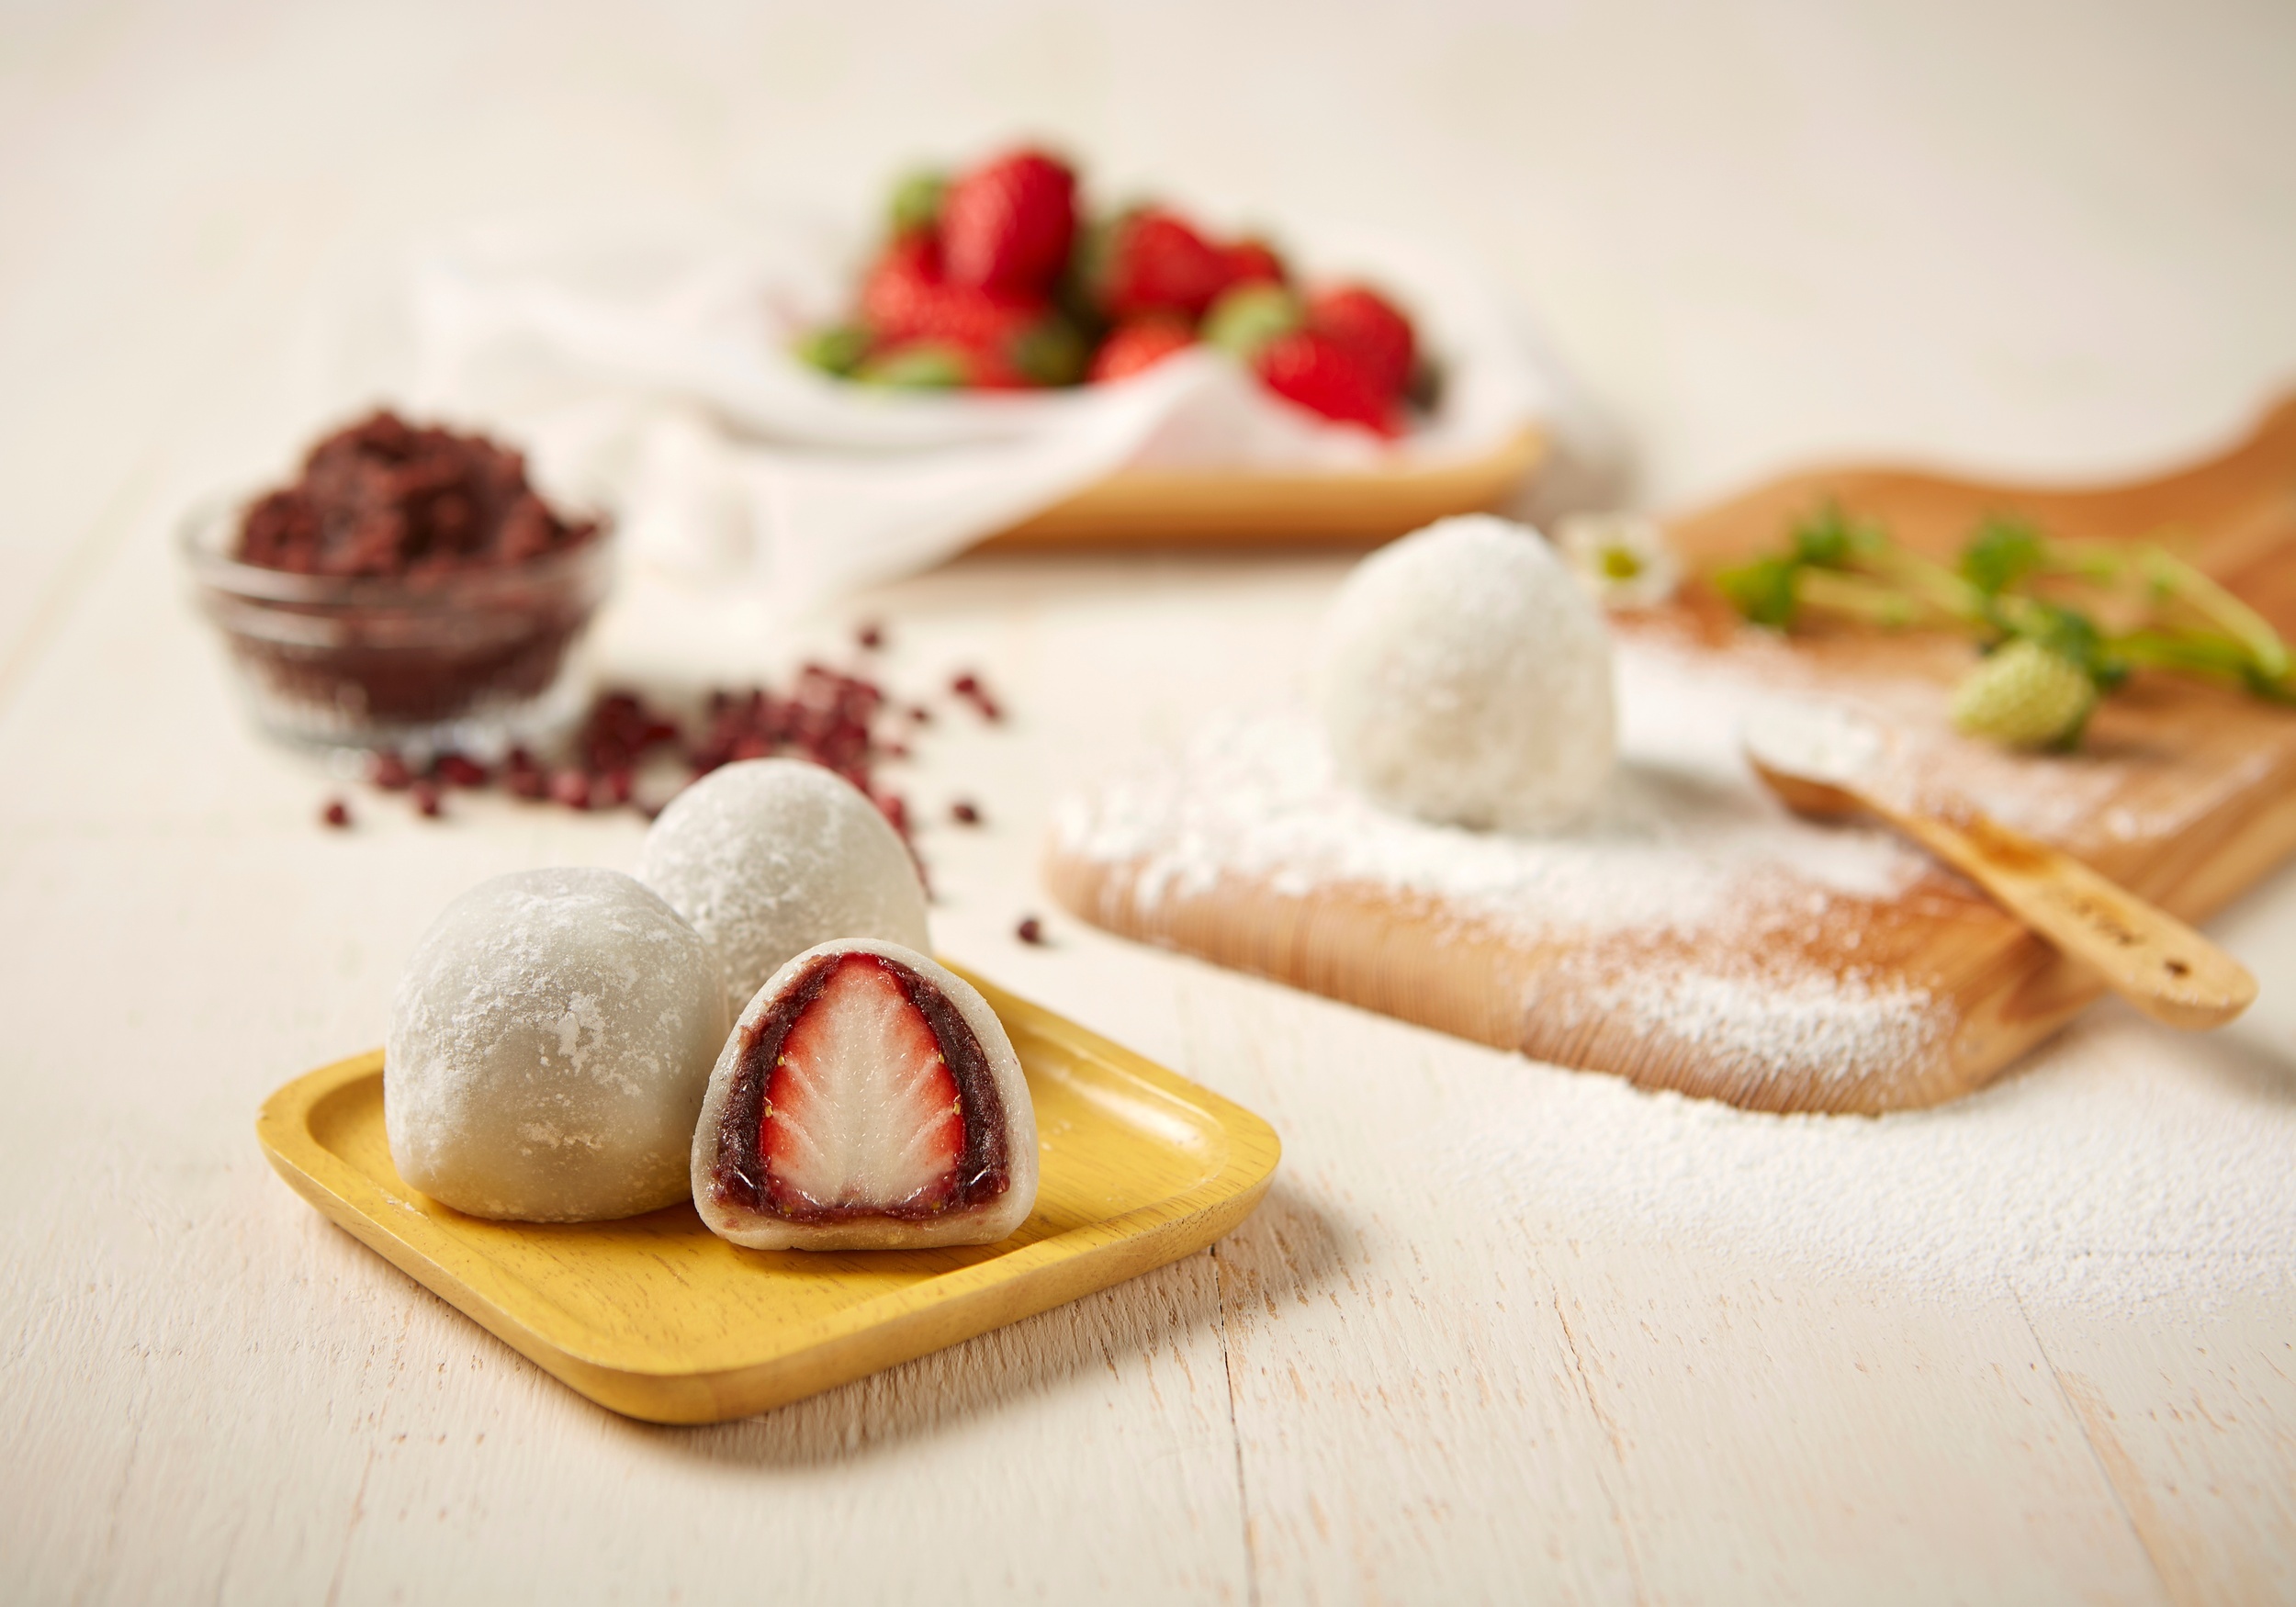 <p>Mochi is becoming more and more mainstream, so we wouldn’t be surprised if you’re already familiar with these Japanese rice cakes. These sweets are especially popular during New Year celebrations, but with <a href="https://www.tastingtable.com/947274/classic-homemade-mochi-recipe/"><span>this recipe from Tasting Table</span></a> — and the necessary ingredients of red bean paste, rice flour, powdered sugar, cornstarch, and strawberries — you can make your own at home anytime.</p><p><a href='https://www.msn.com/en-us/community/channel/vid-cj9pqbr0vn9in2b6ddcd8sfgpfq6x6utp44fssrv6mc2gtybw0us'>Follow us on MSN to see more of our exclusive lifestyle content.</a></p>